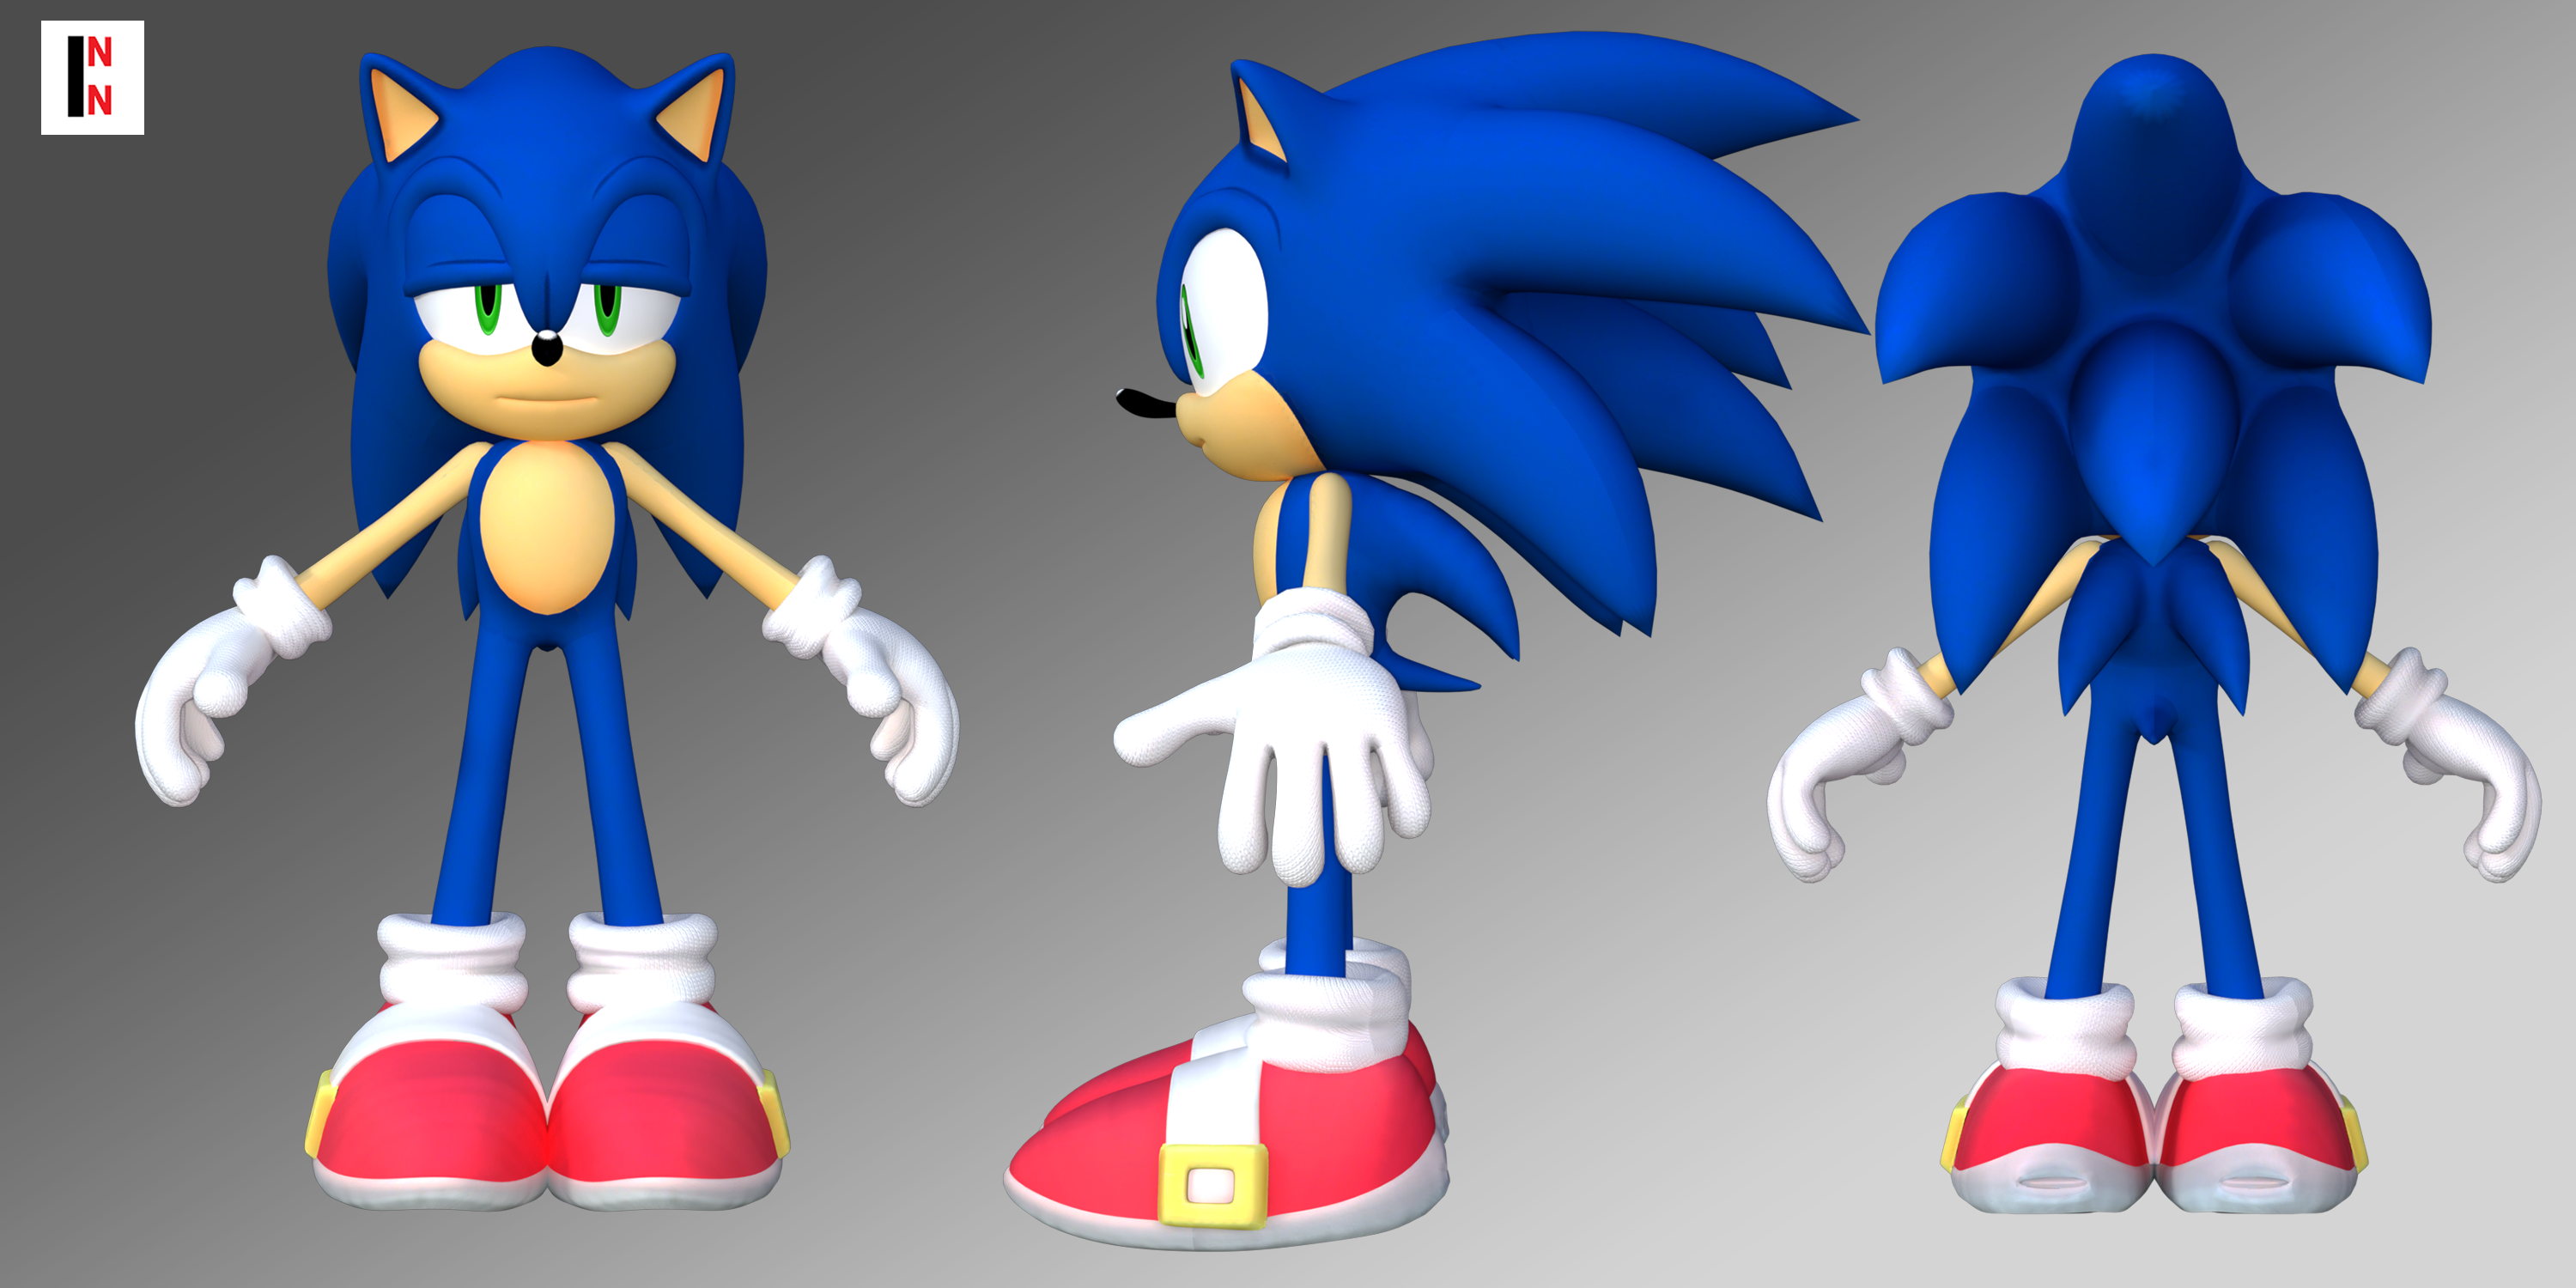 Sonic the Hedgehog - Textures + DOWNLOAD by Detexki99 on DeviantArt